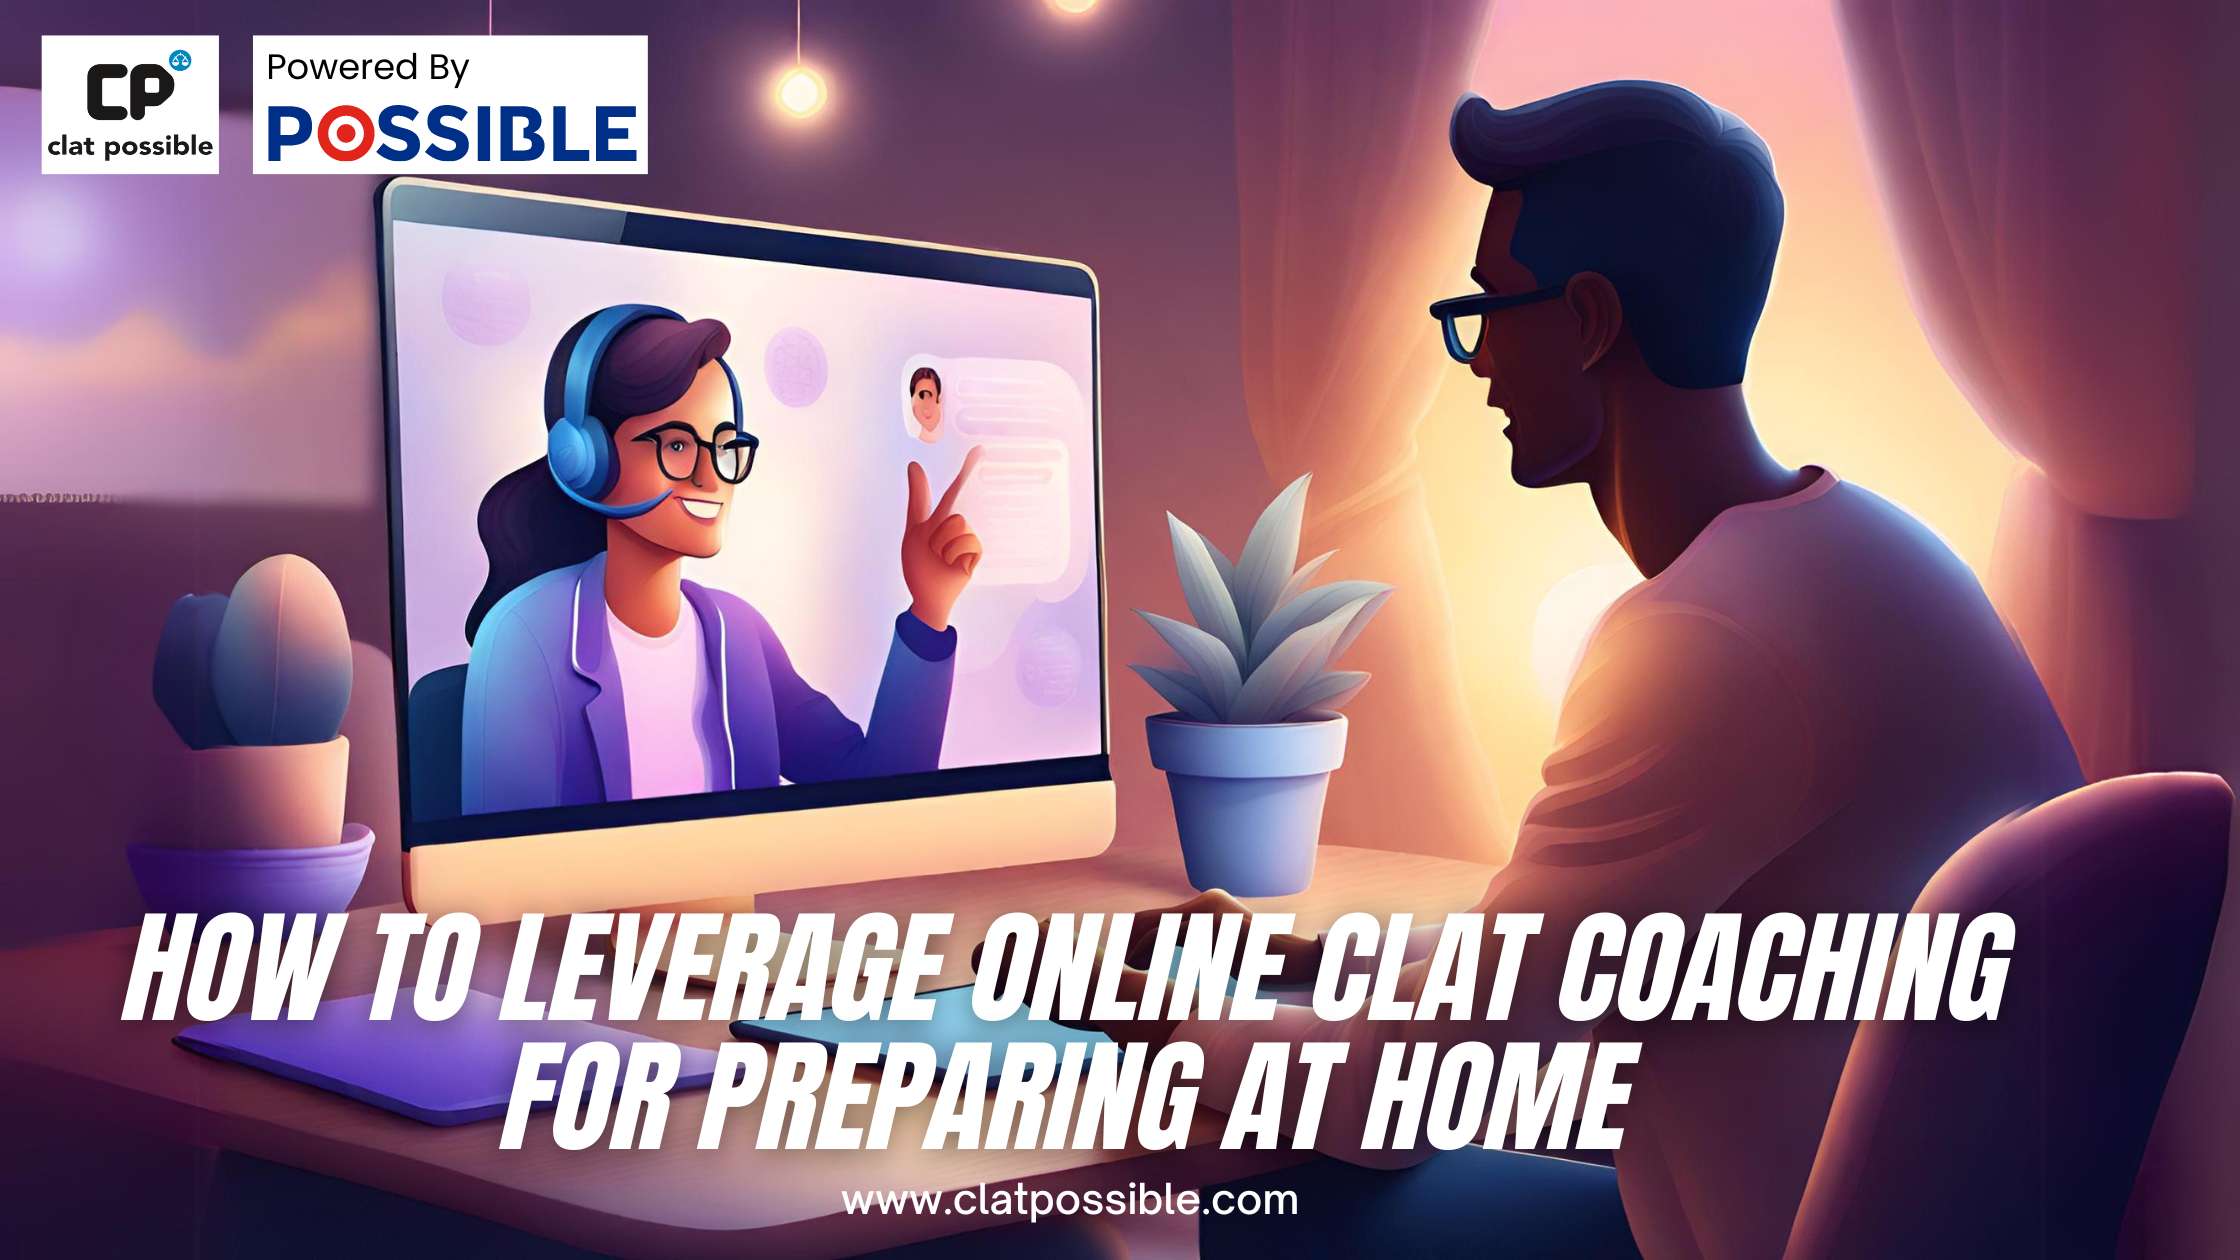 How to Leverage Online CLAT Coaching for Preparing at Home